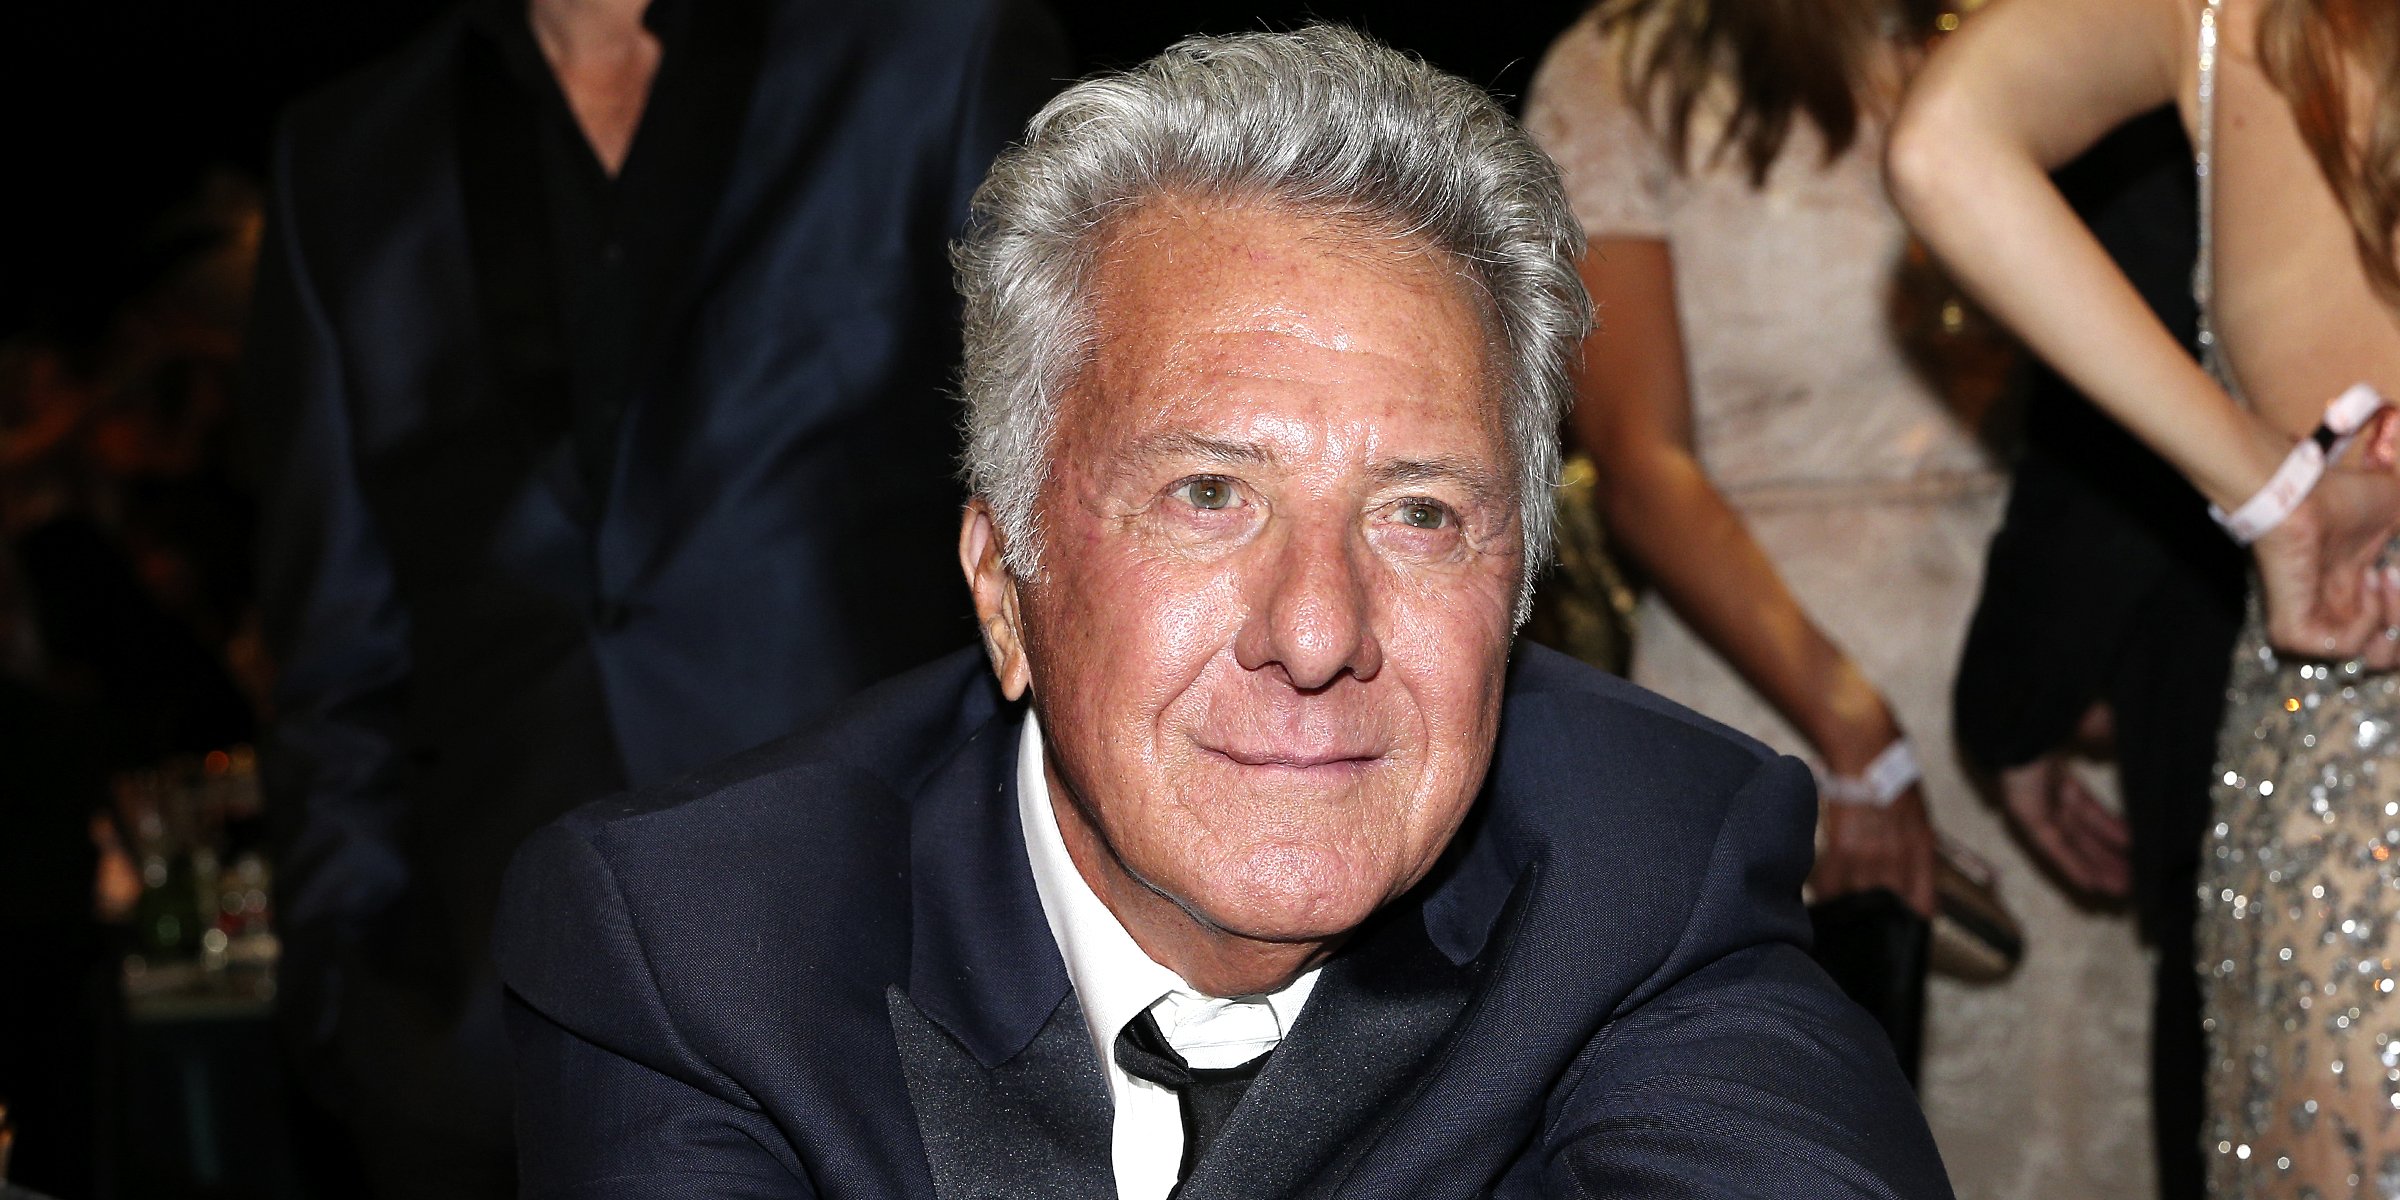 Dustin Hoffman's 'Fighter' Son Jake Is the Carbon Copy of His Dad ...